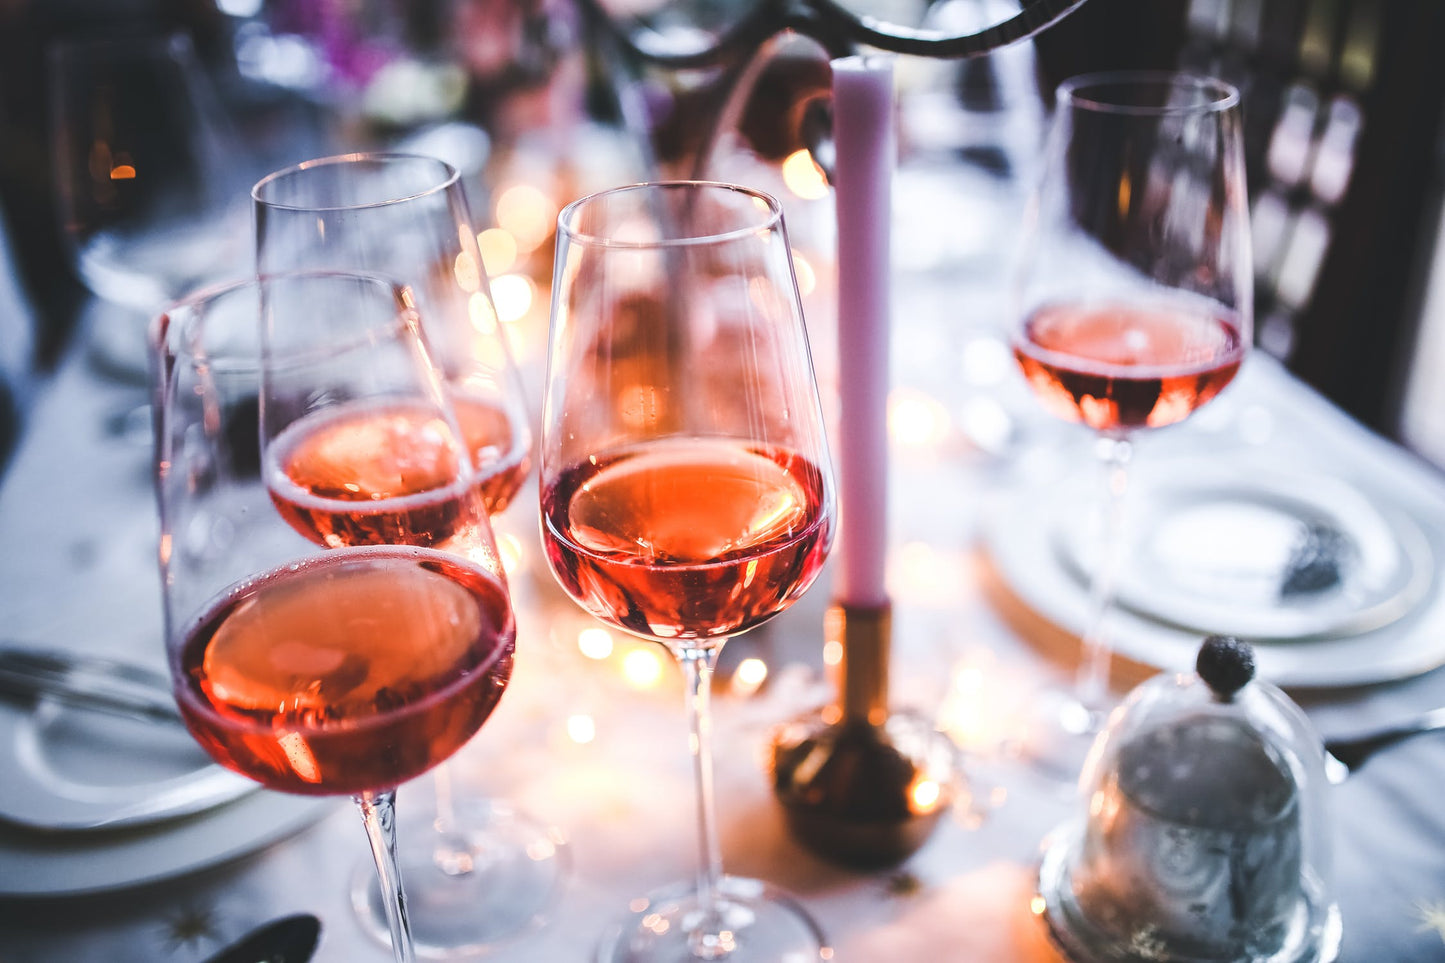 Celebrate Spring with These Delicious Rosé Champagne Food Pairings